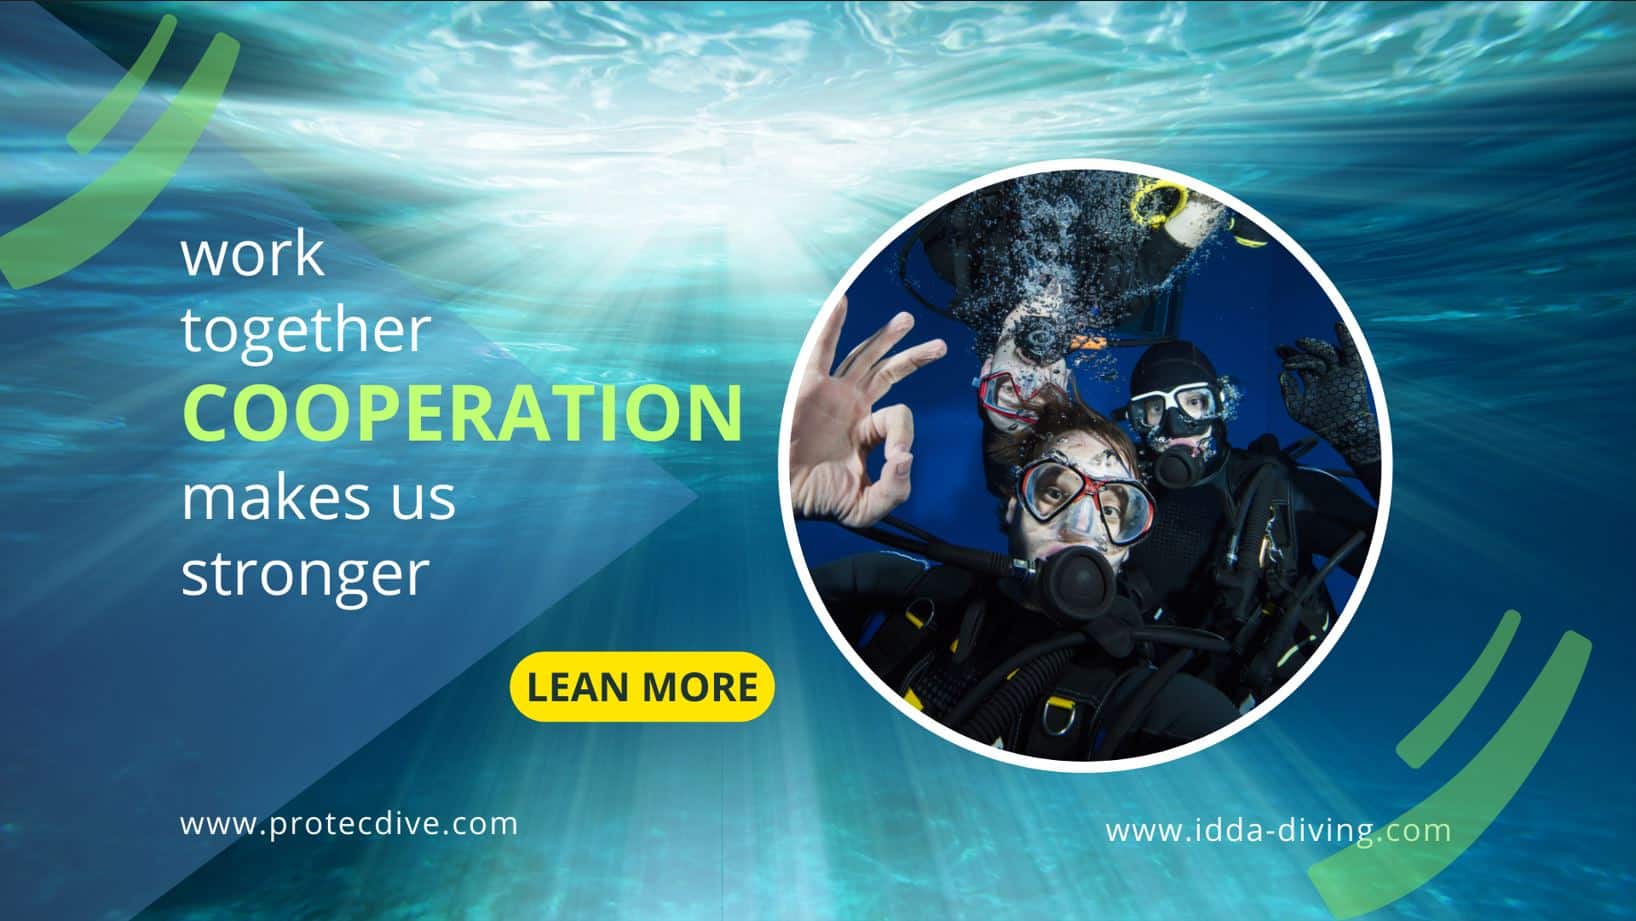 diver new cooperation protecdive